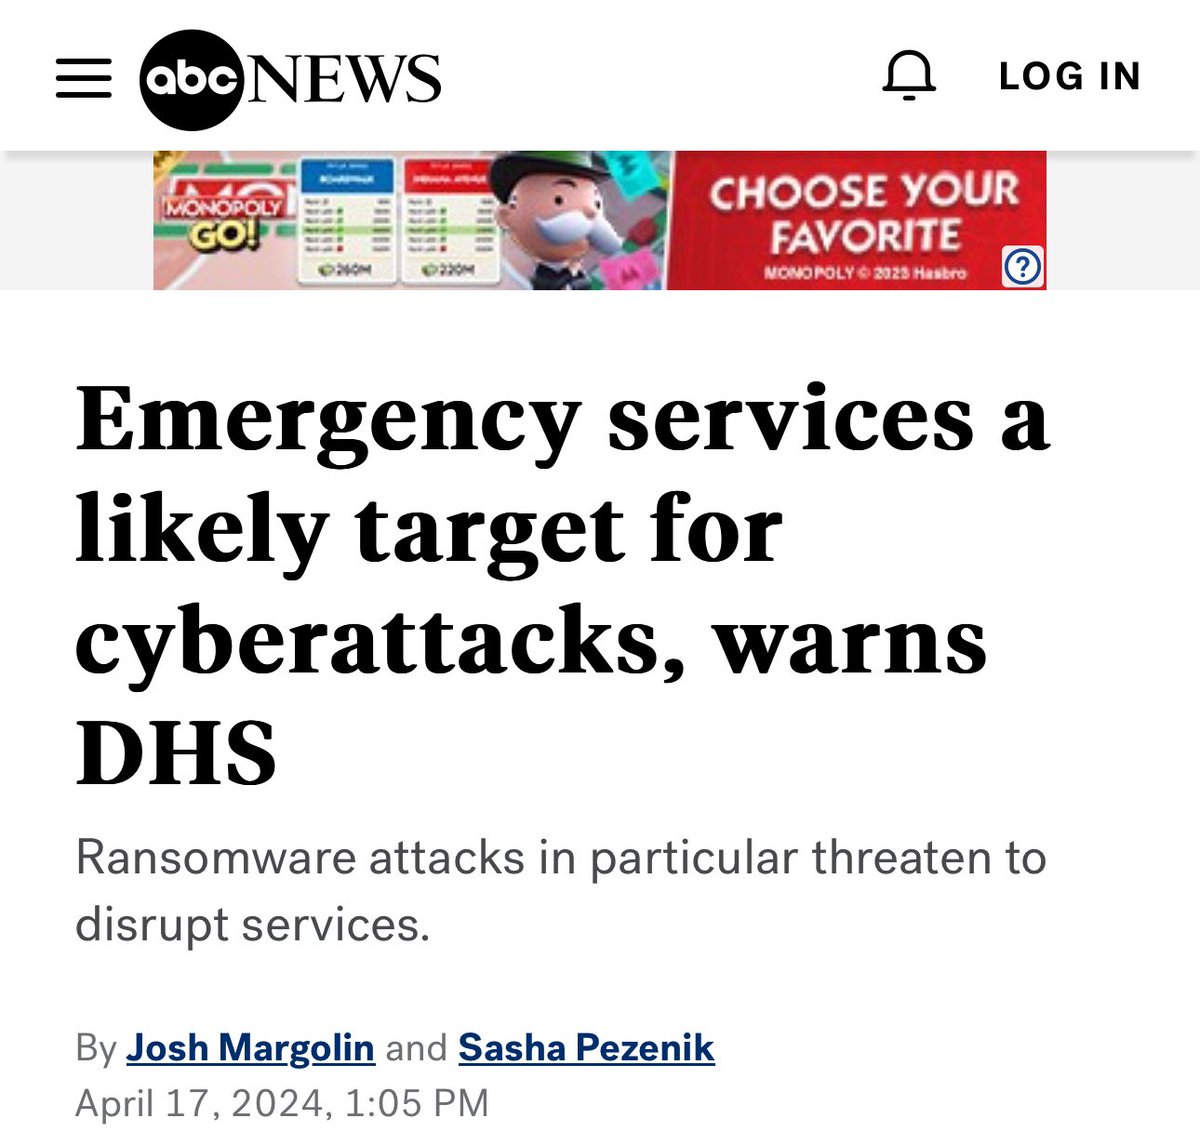 ABC News JUST TODAY, came out with an article called “Emergency services a likely target for cyberattacks, warns DHS” 😳😳😳 You couldn’t even make this up if you tried. For real. “Ransomware attacks have “disrupted the networks of police department and 911 call center…